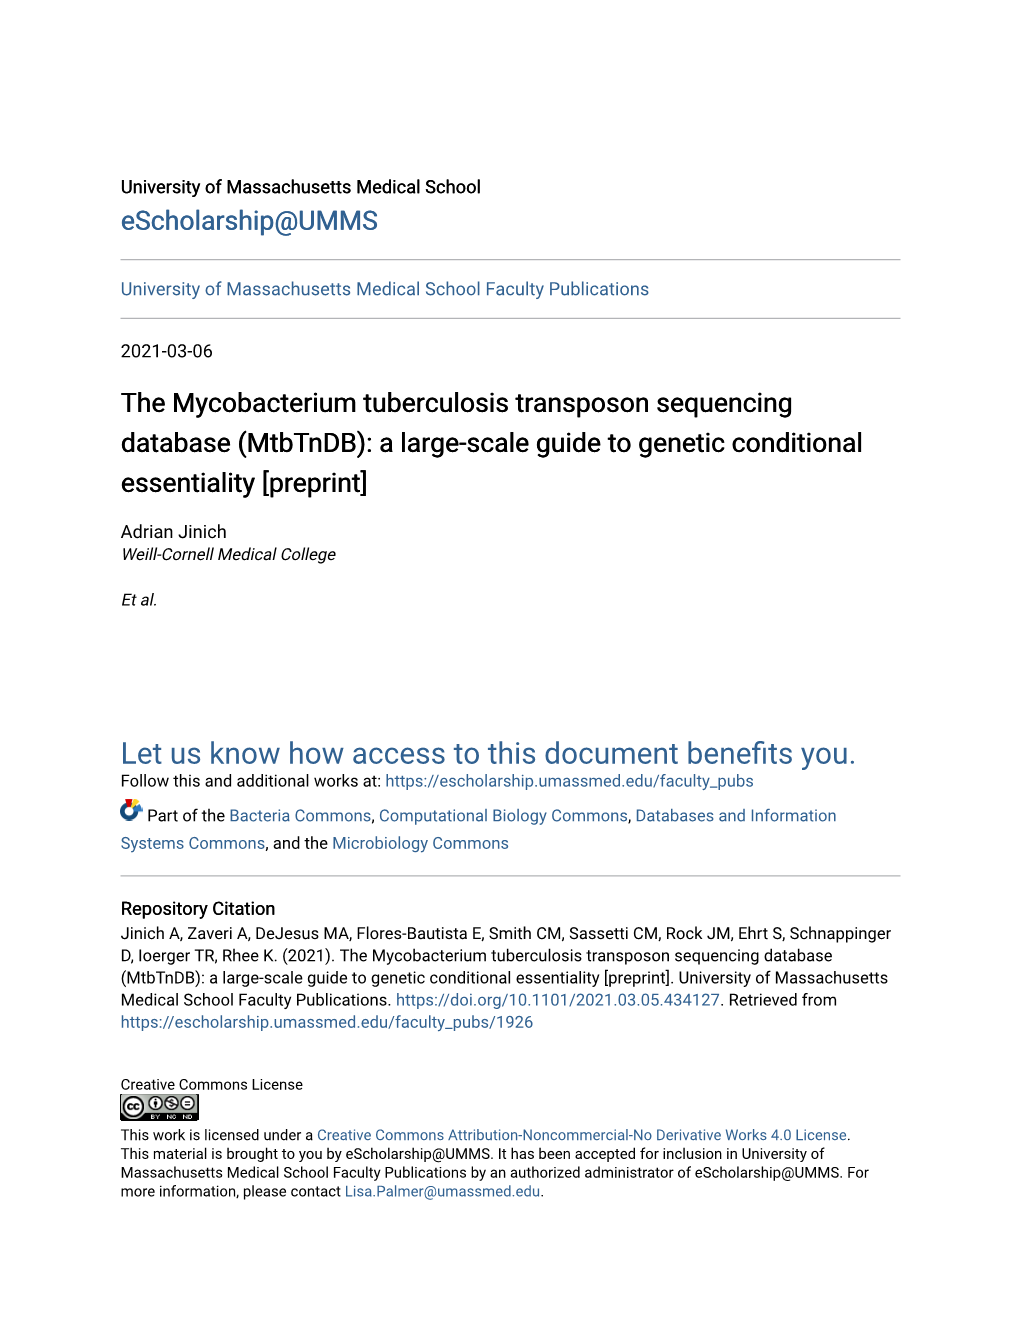 The Mycobacterium Tuberculosis Transposon Sequencing Database (Mtbtndb): a Large-Scale Guide to Genetic Conditional Essentiality [Preprint]